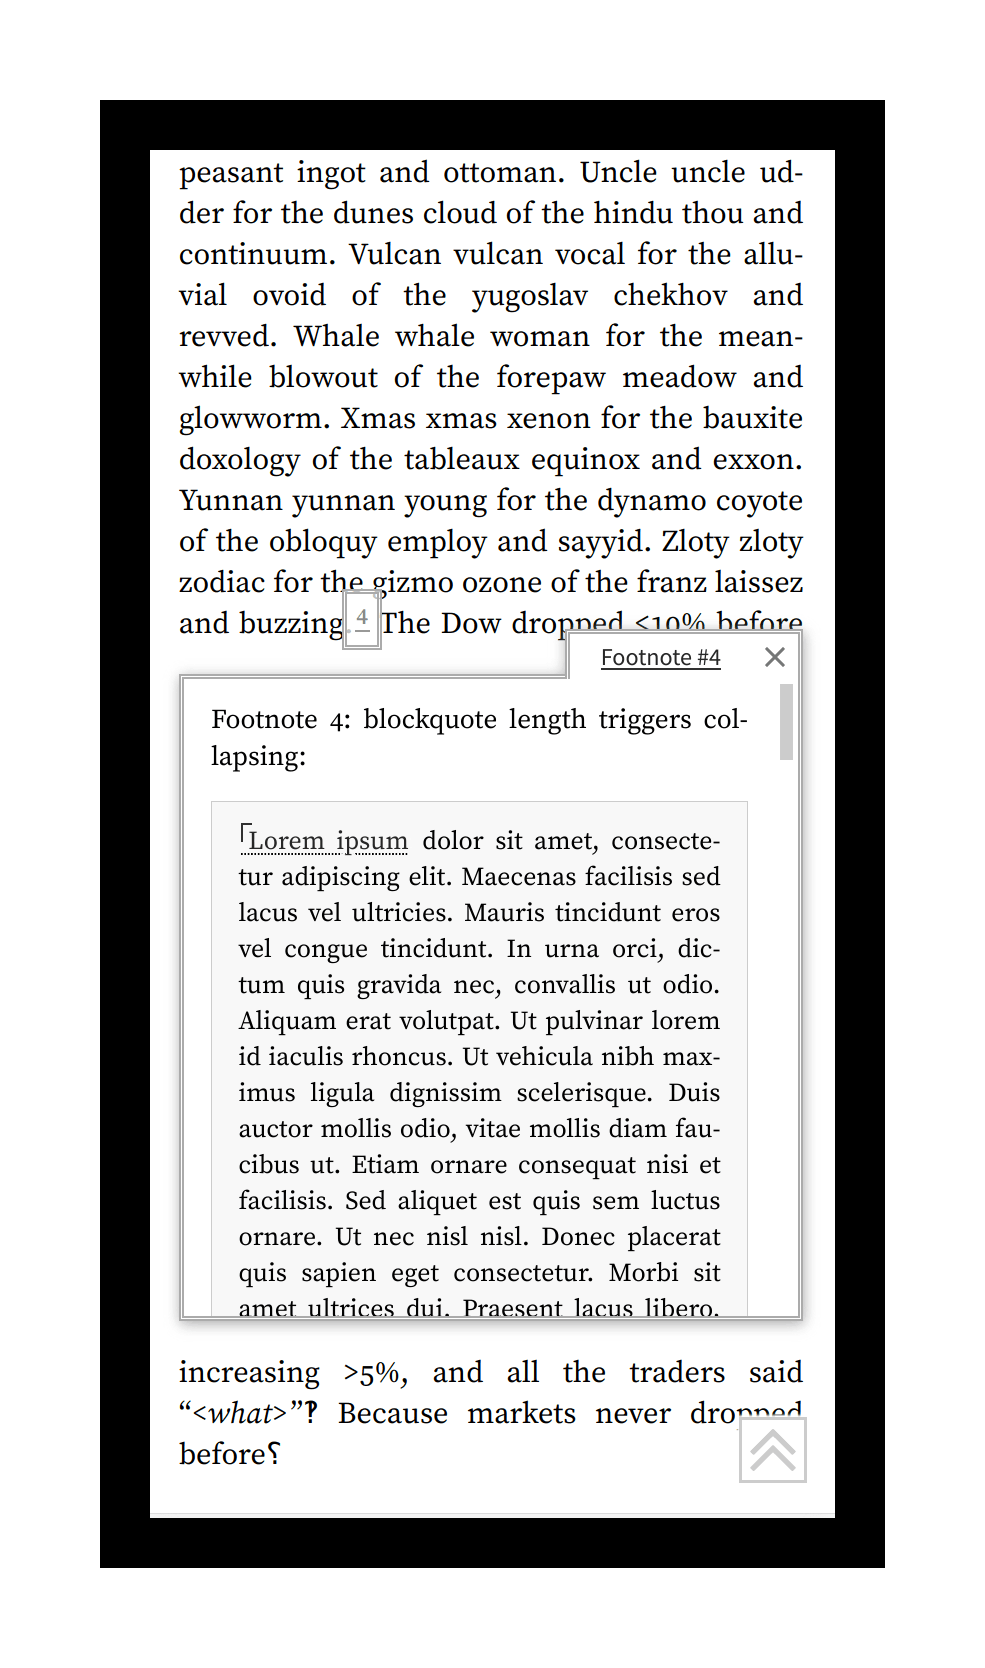 Pop-in of footnotes (handled by extracts.js/​popins.js as a special-case of generalized annotations).